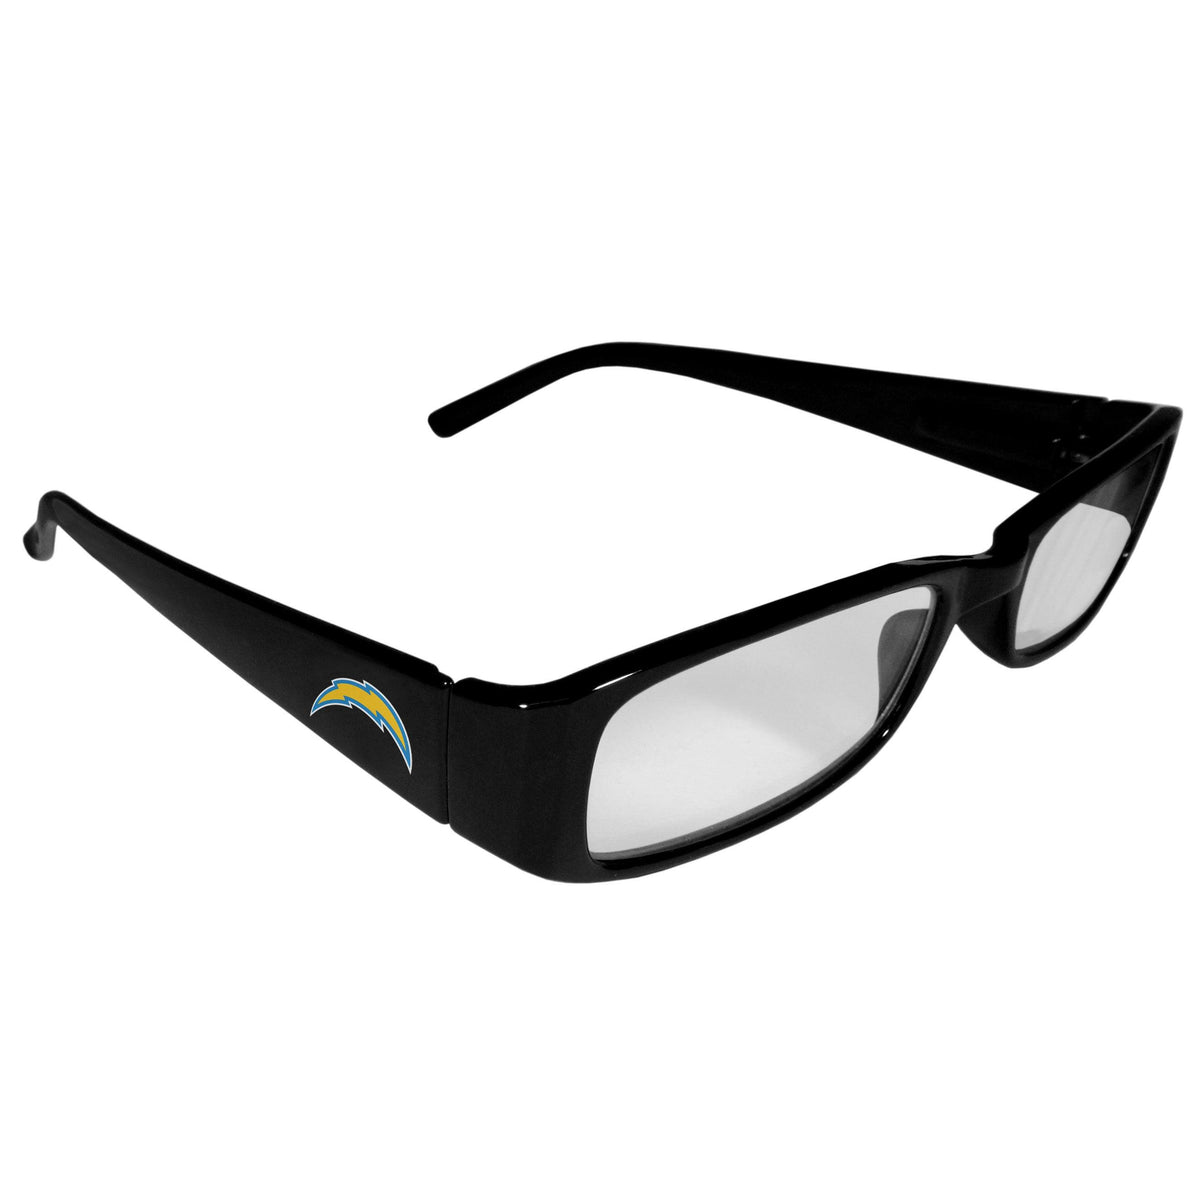 Los Angeles Chargers Printed Reading Glasses, +2.00 - Flyclothing LLC